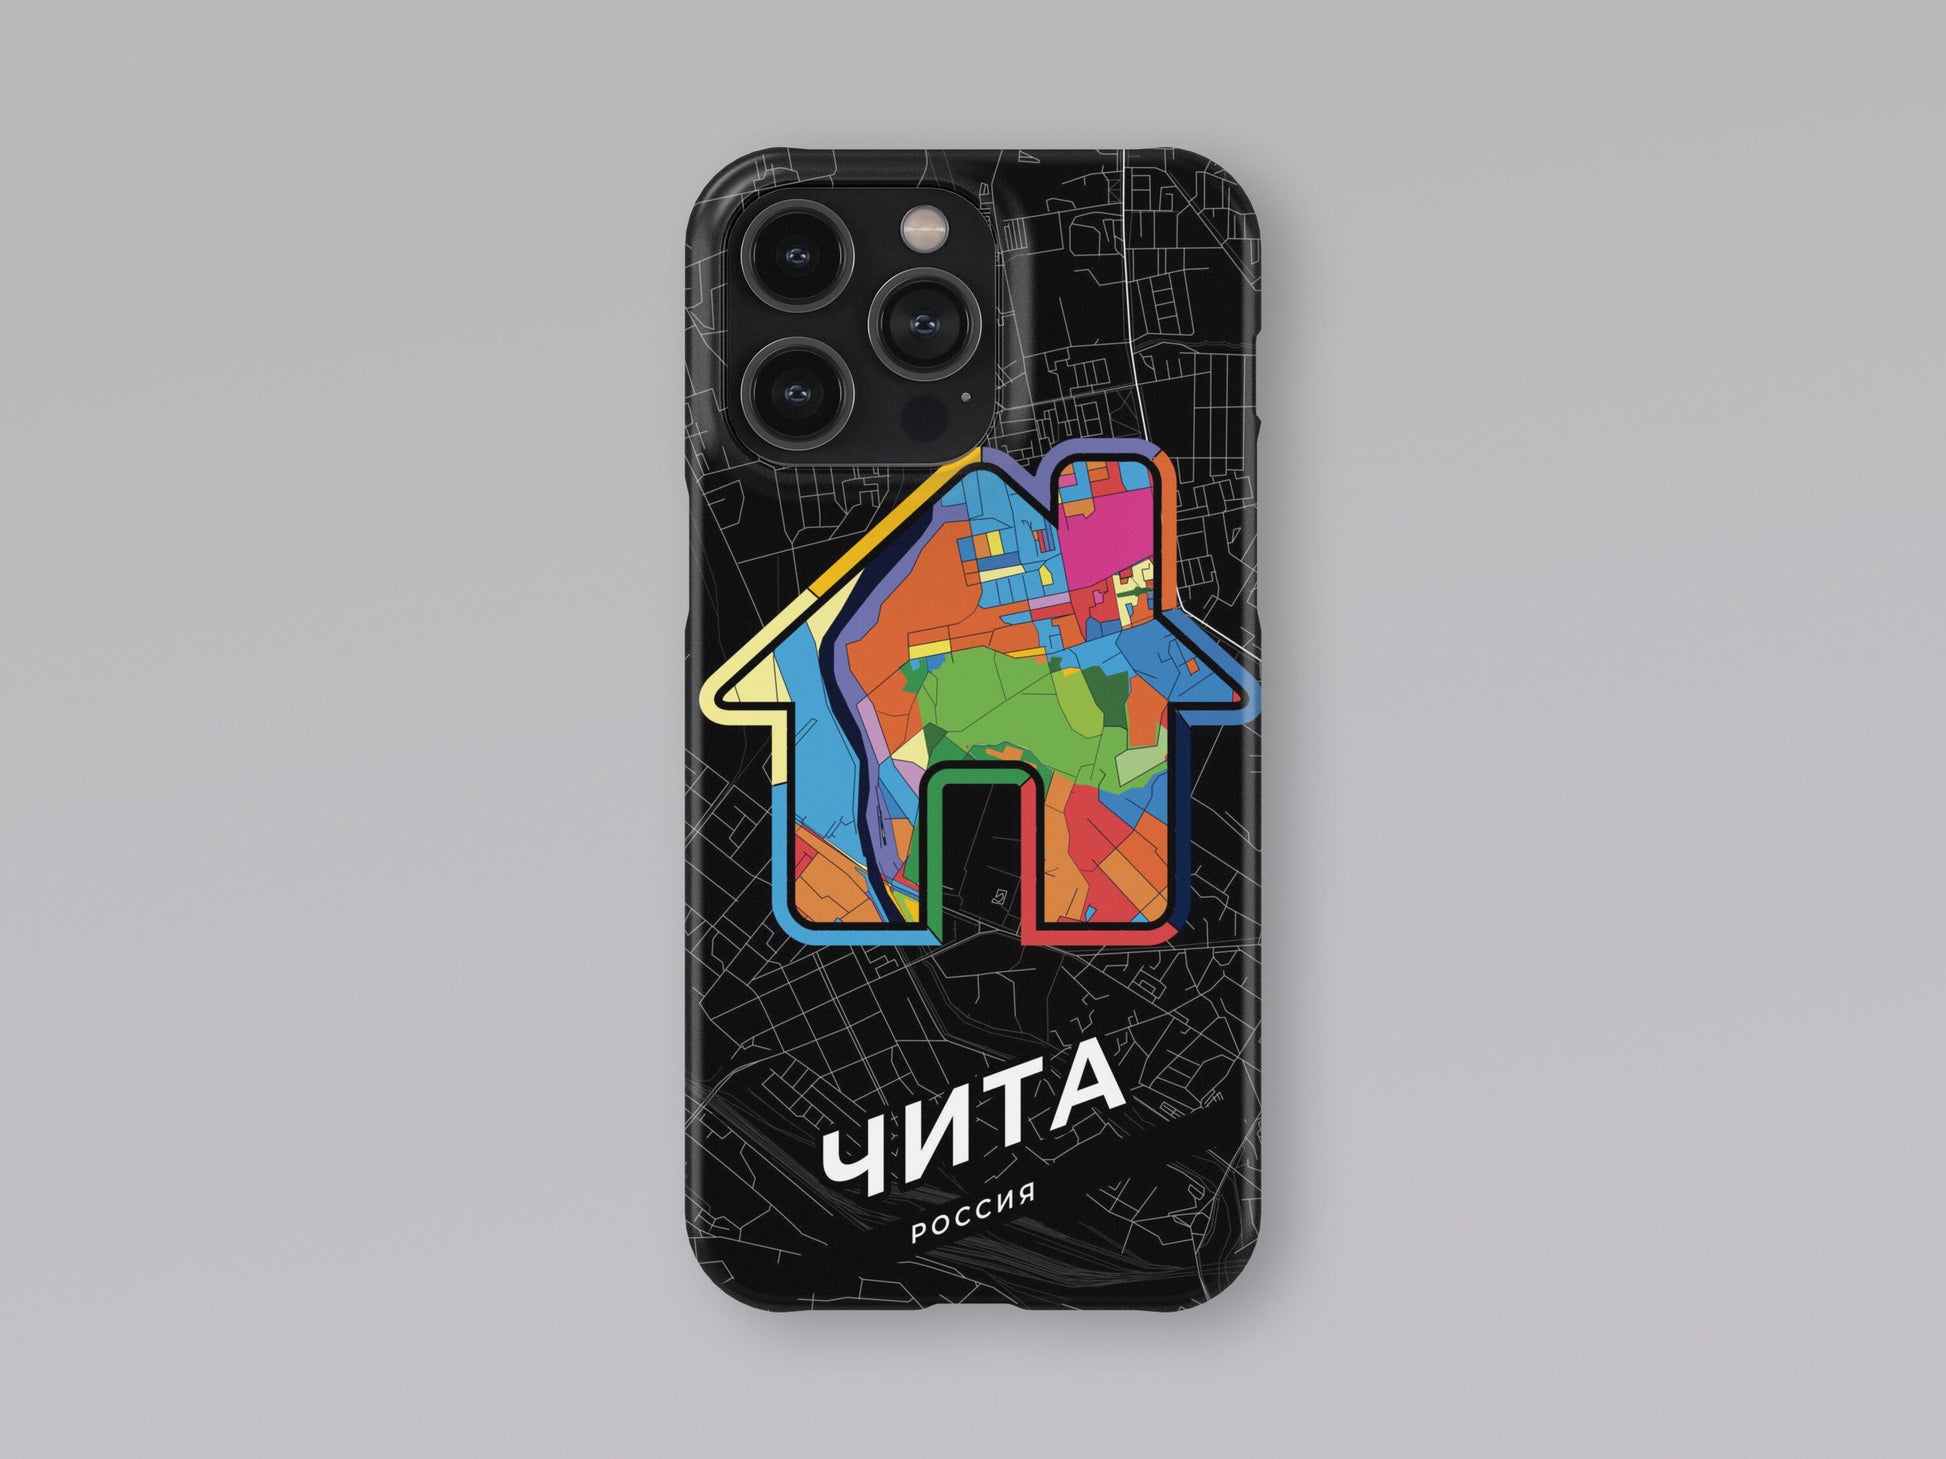 Chita Russia slim phone case with colorful icon. Birthday, wedding or housewarming gift. Couple match cases. 3